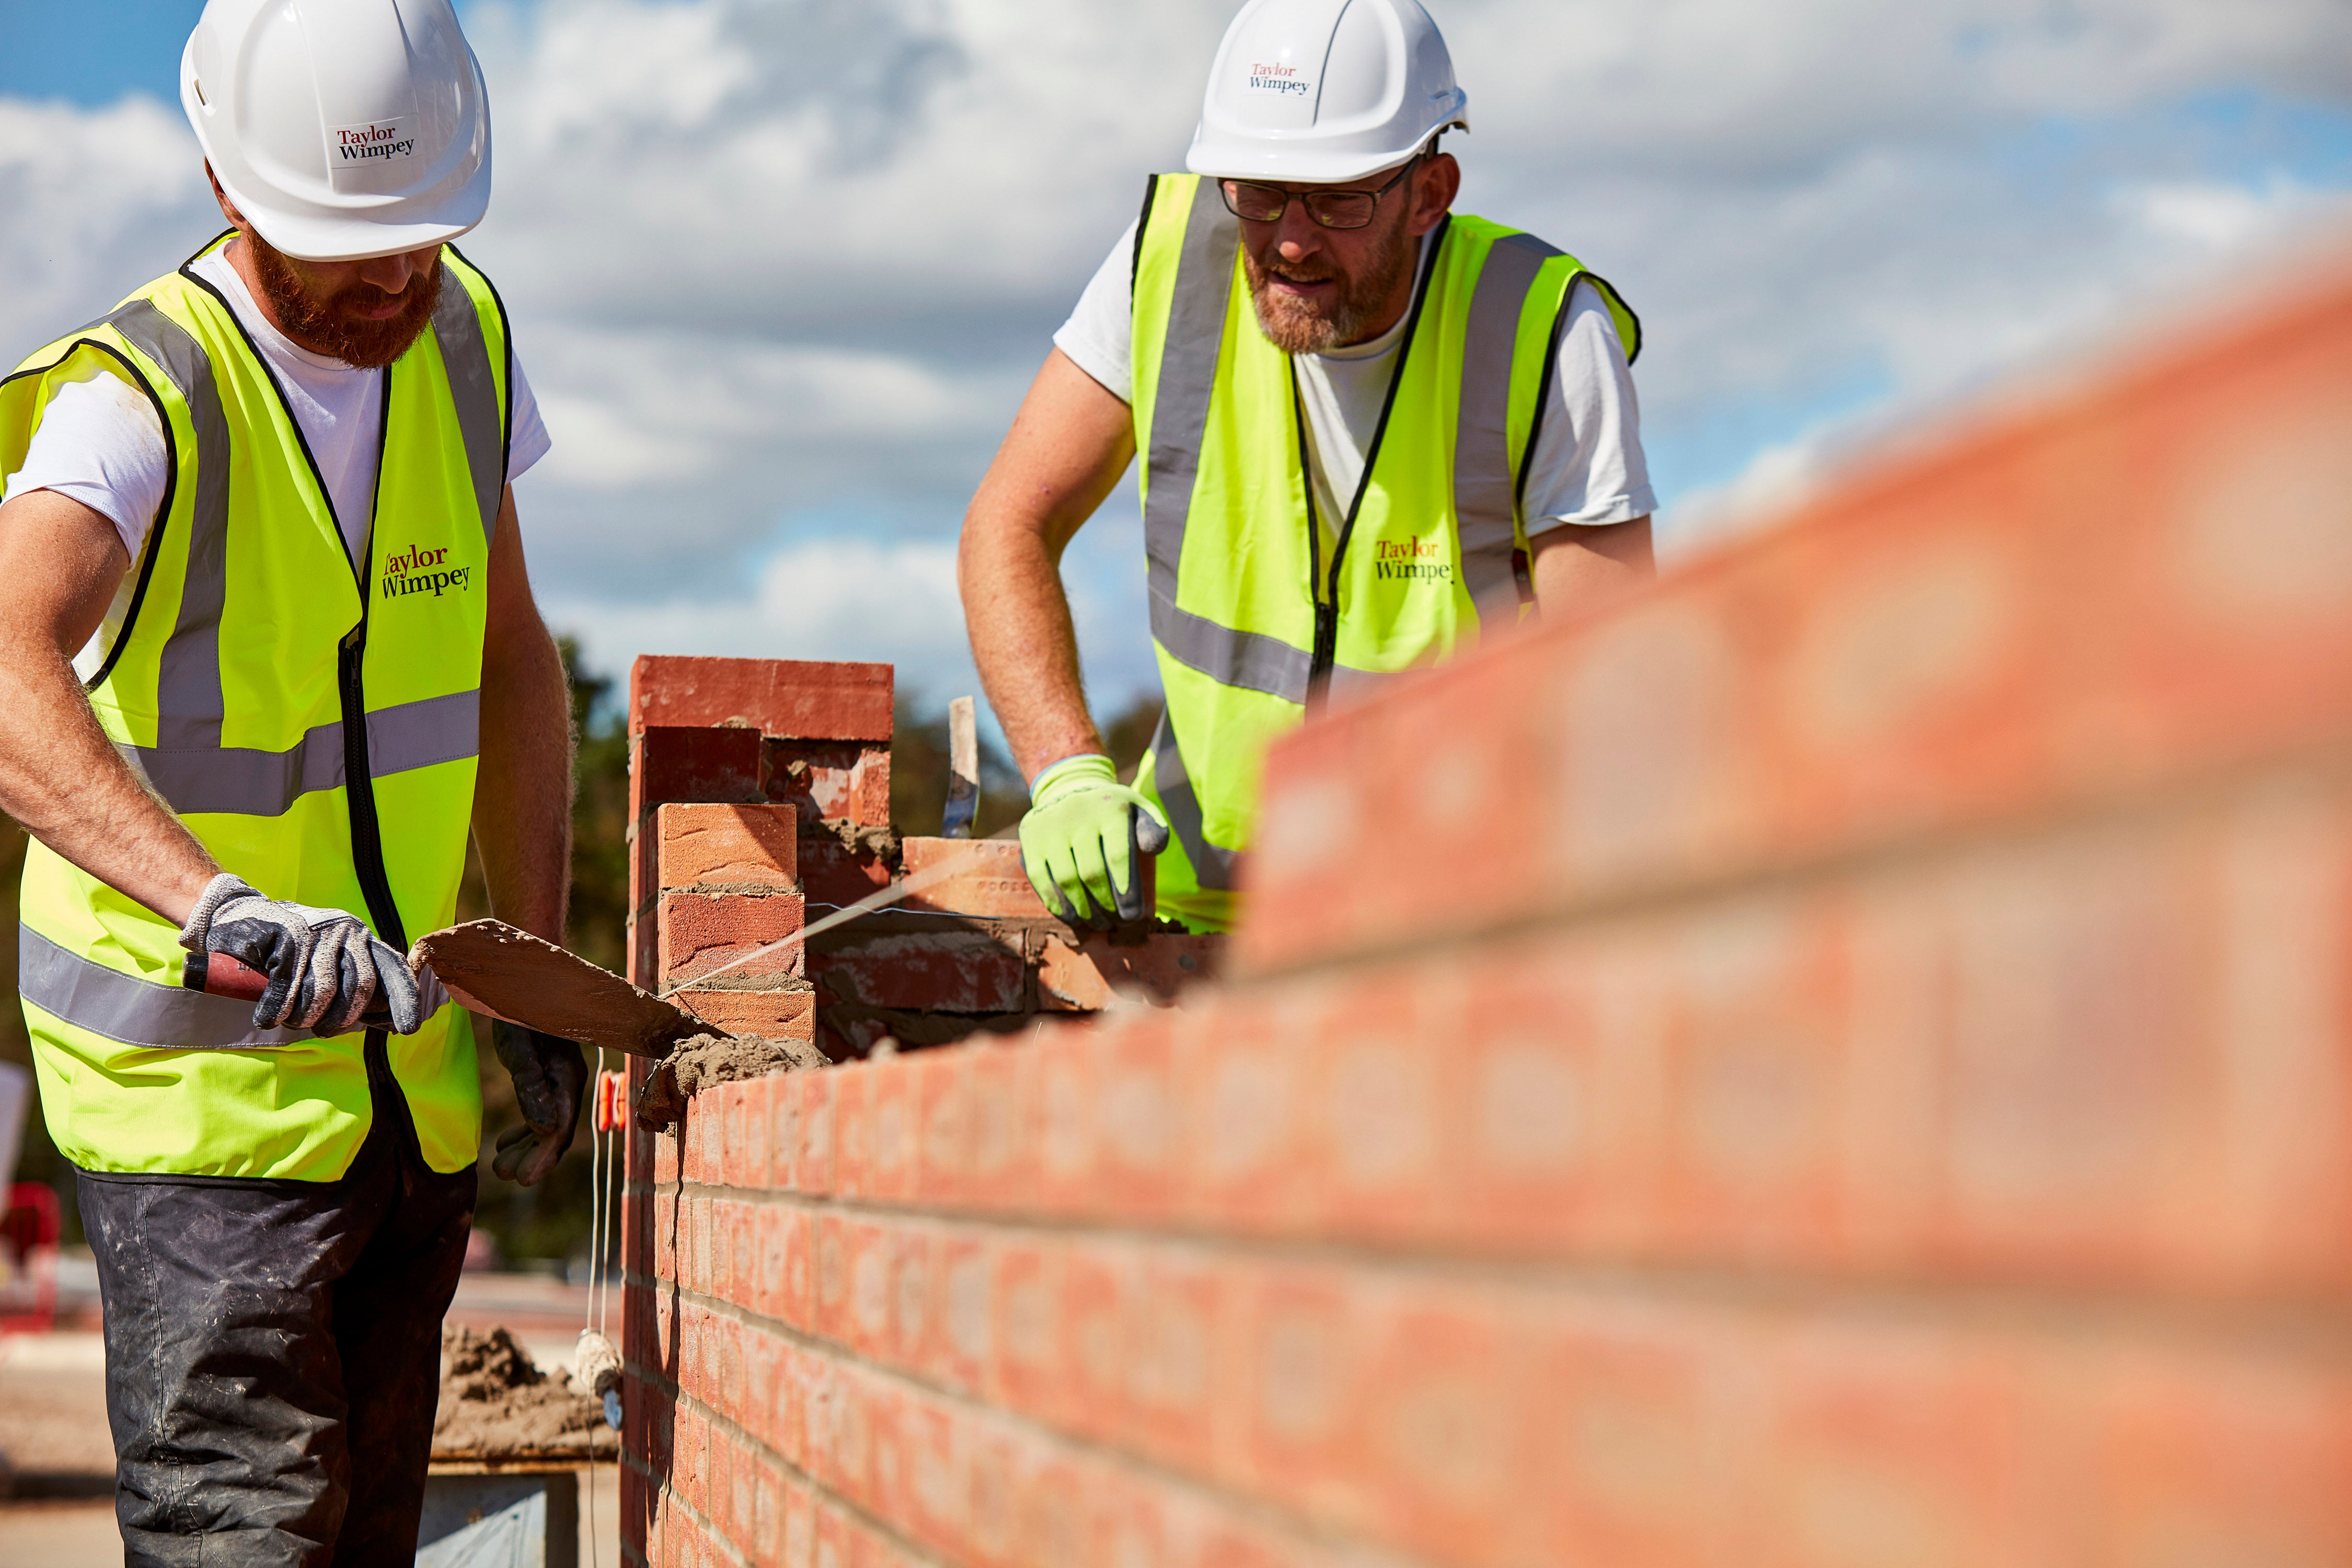 The construction sector was spurred by new official data released on Tuesday (Taylor Wimpey/PA)